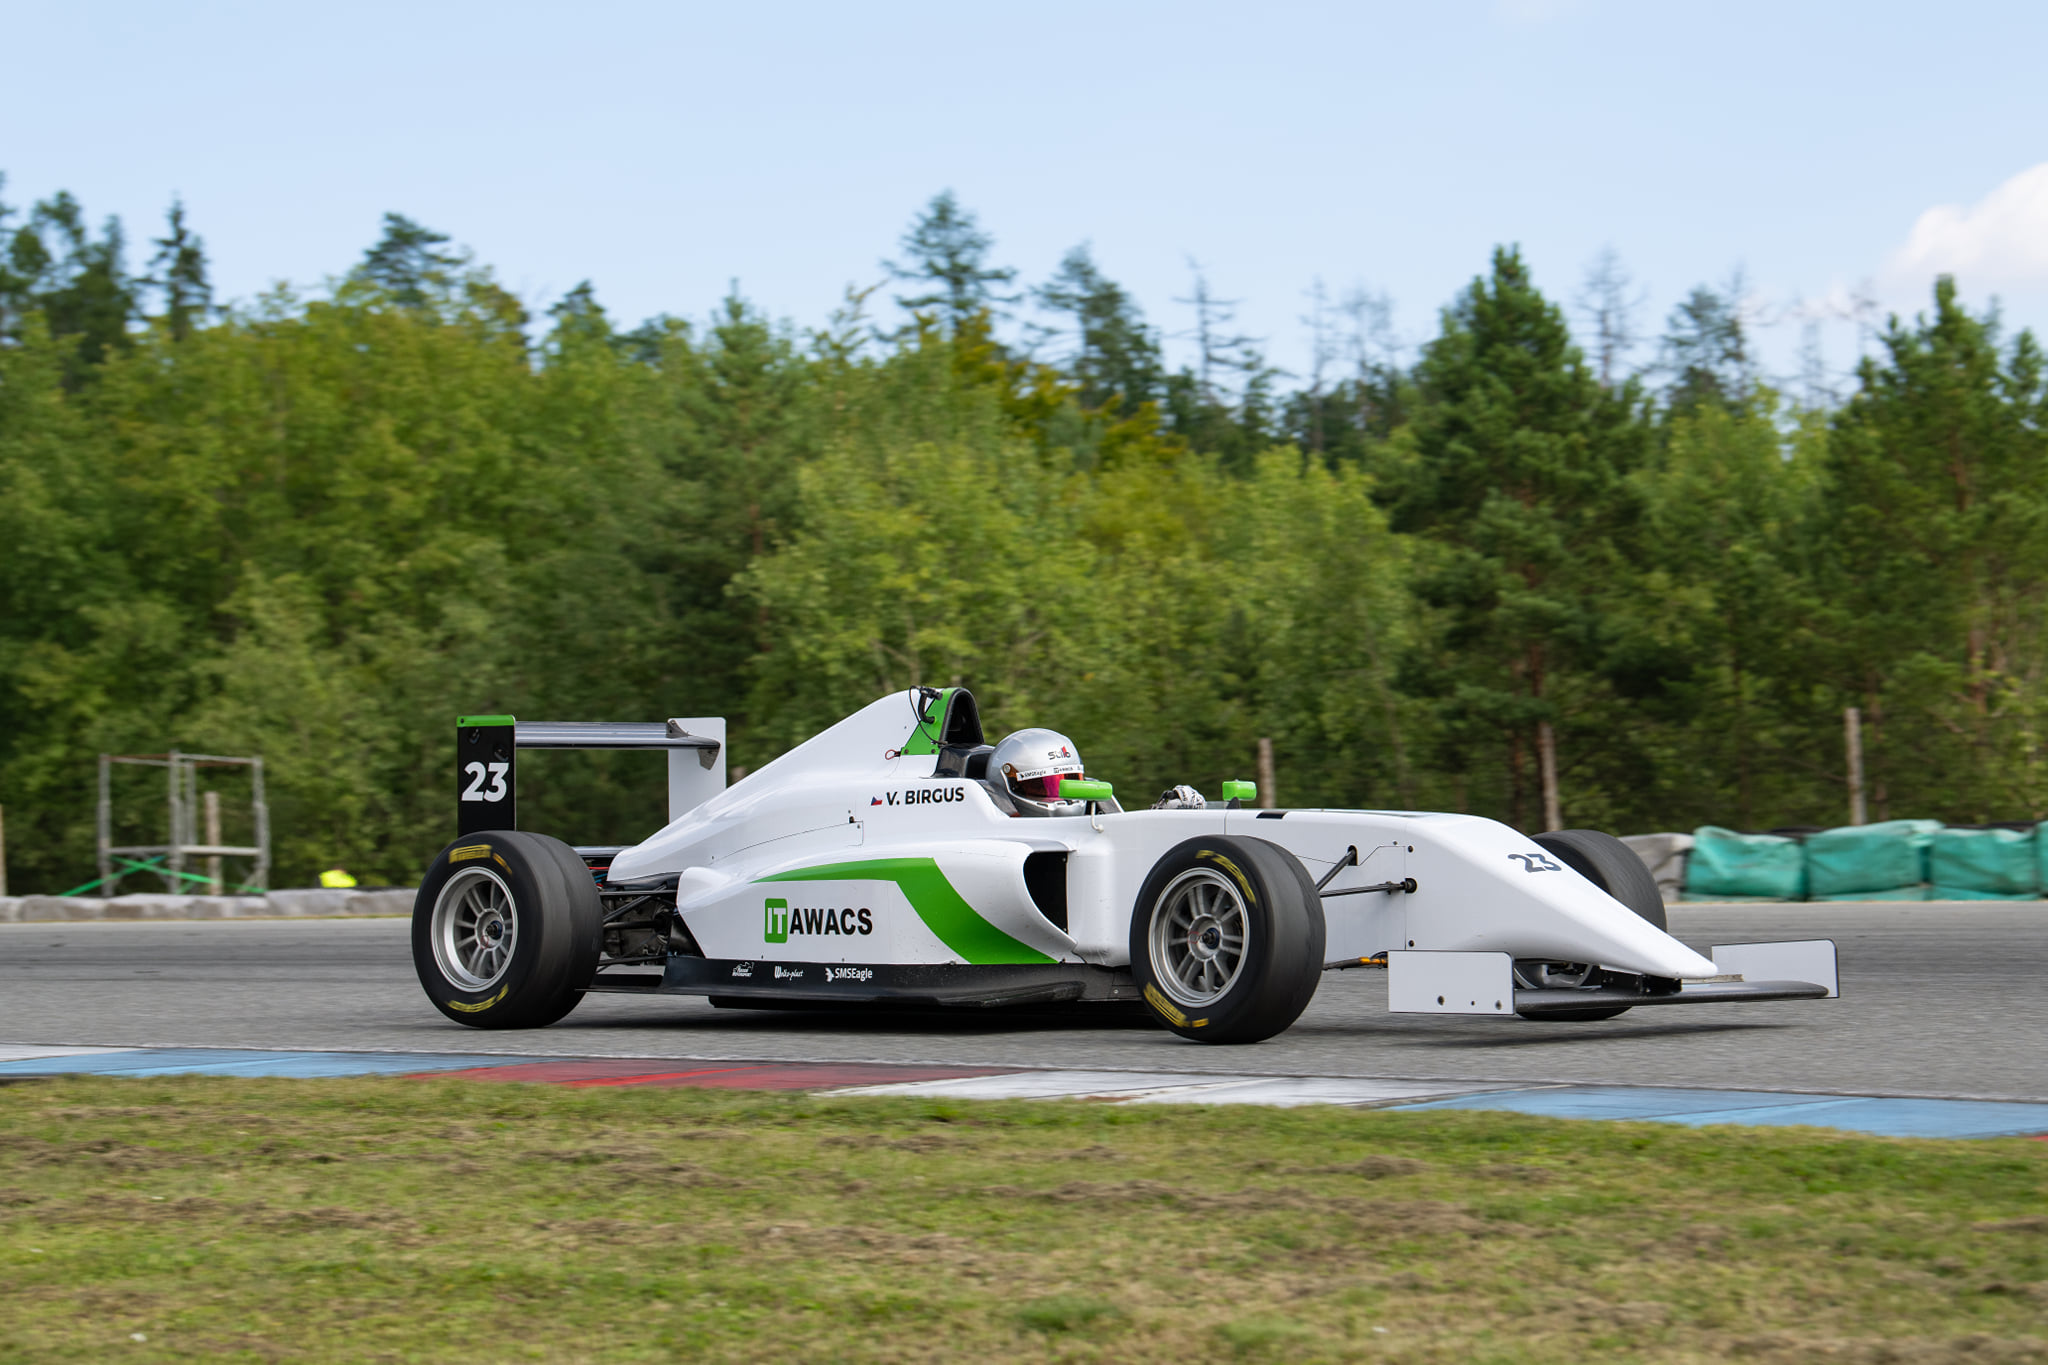 The Czech team JMT Racing Engineering is preparing for the ACCR F4 championship